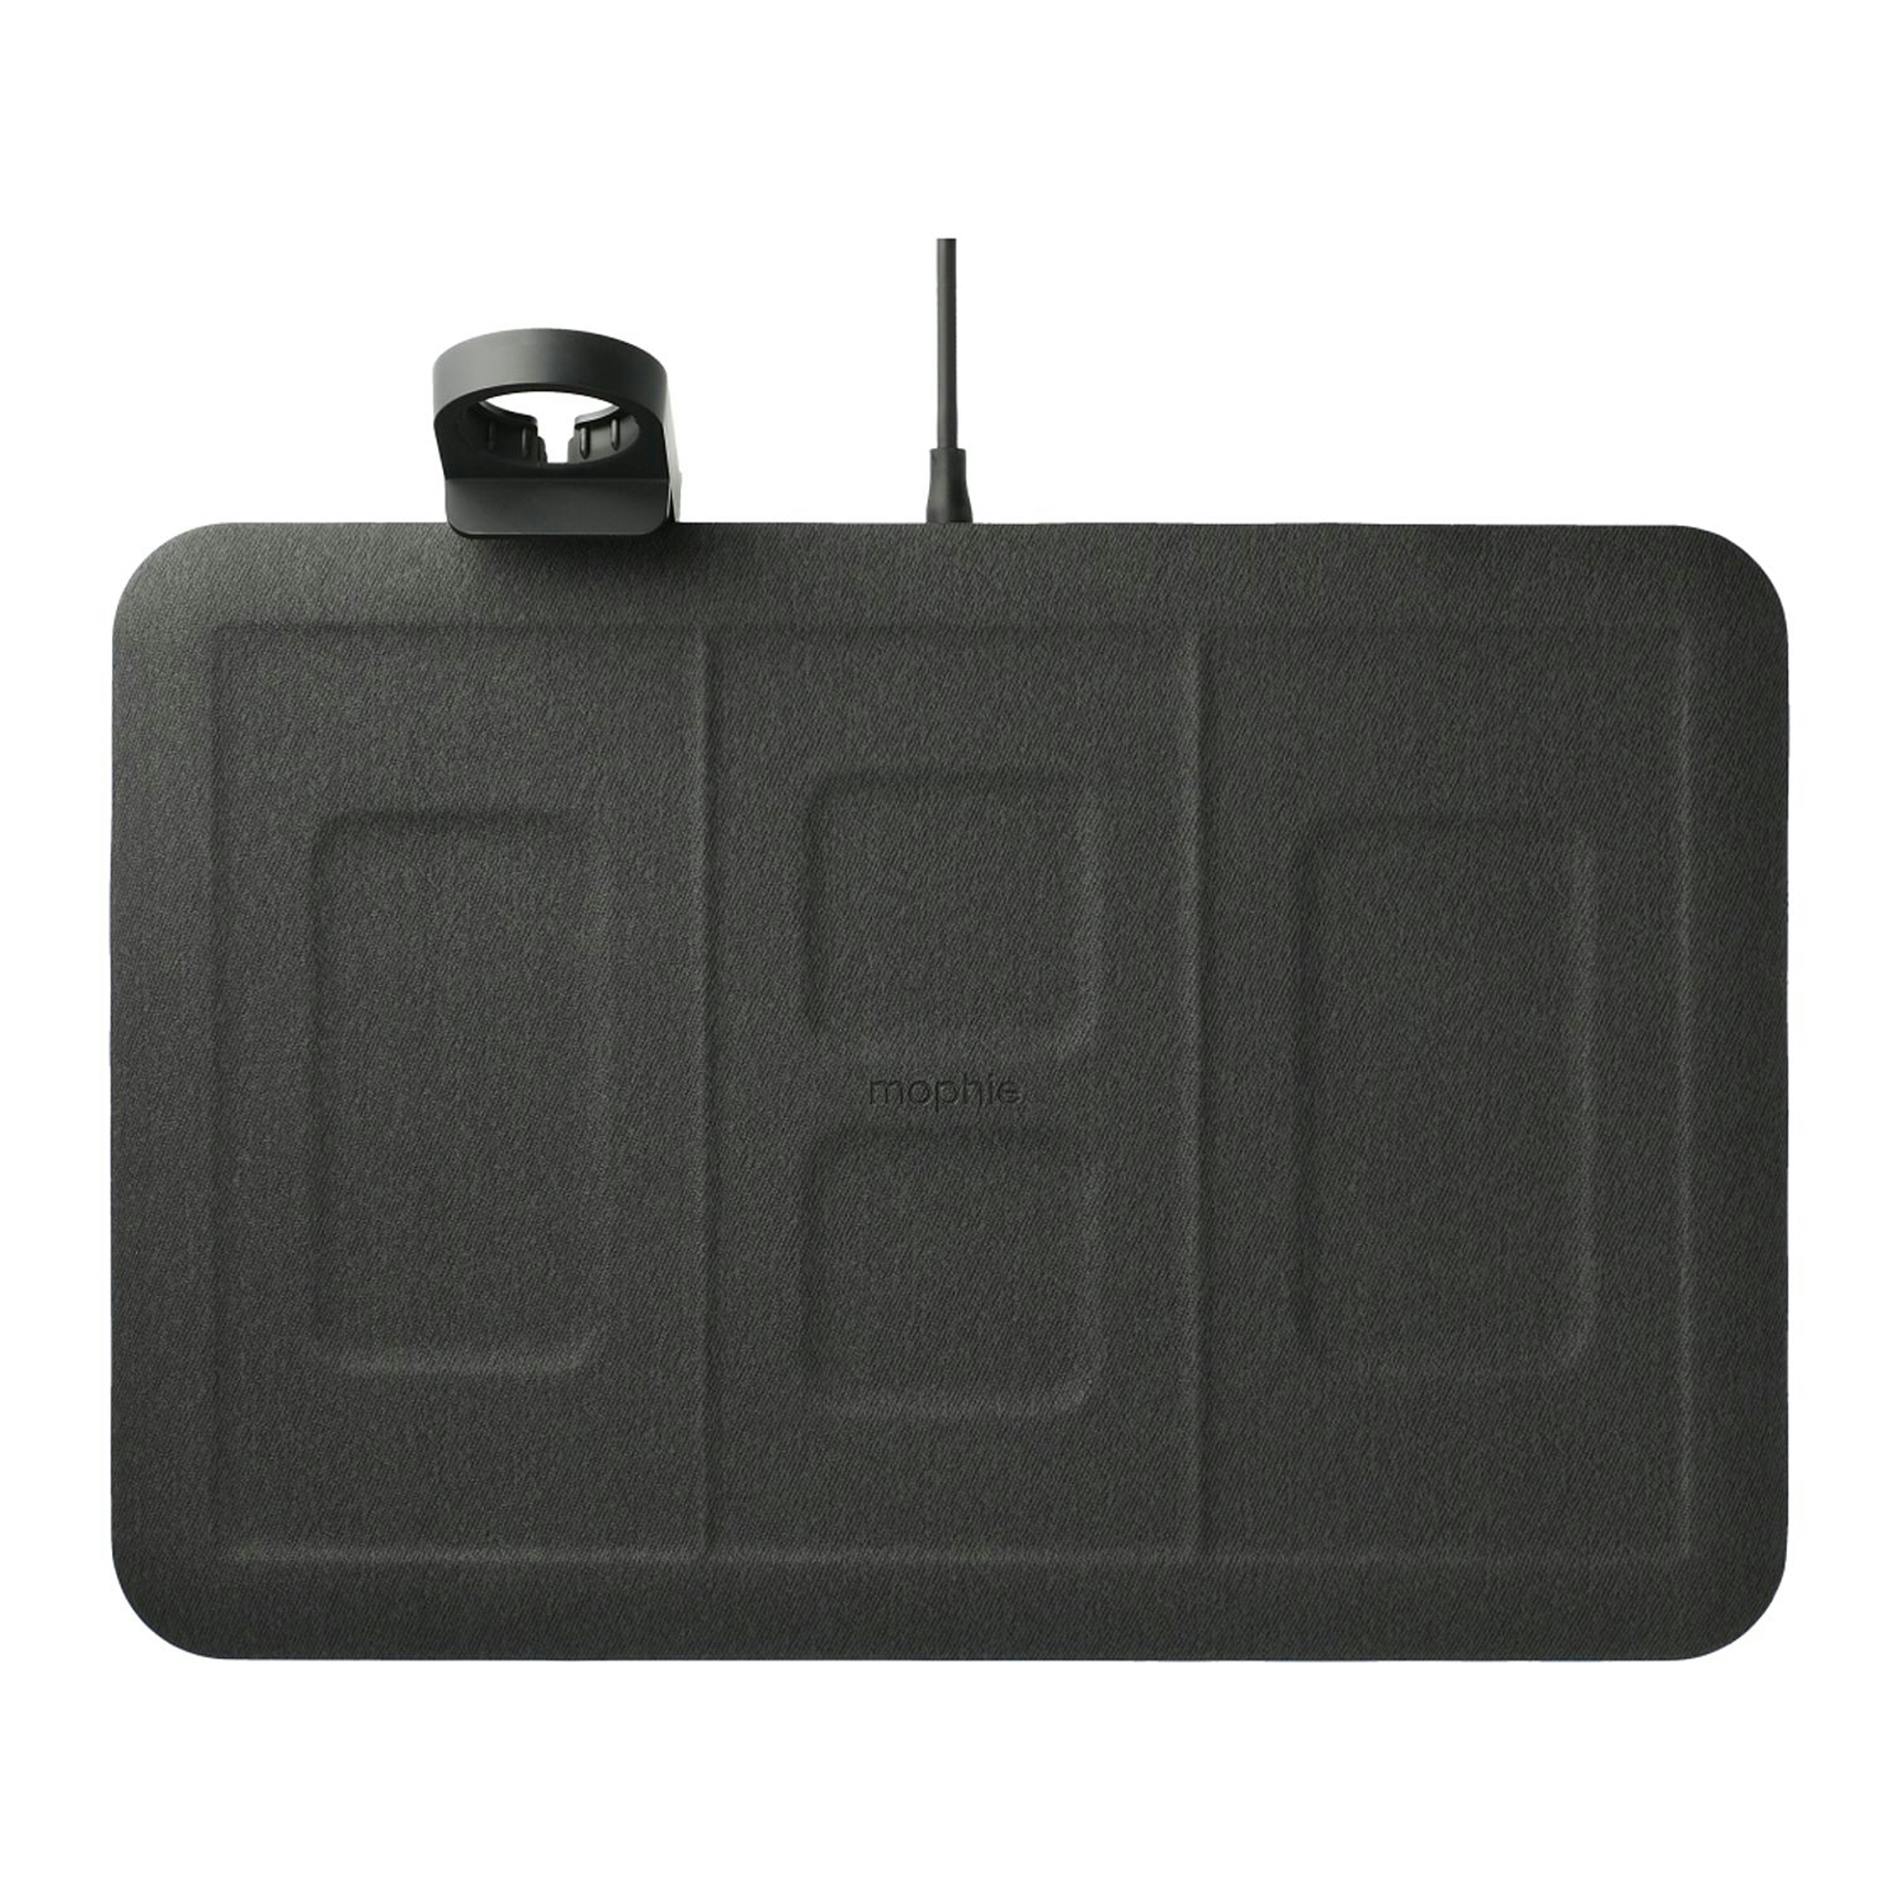 mophie® 4-in-1 Wireless Charging Mat - additional Image 3